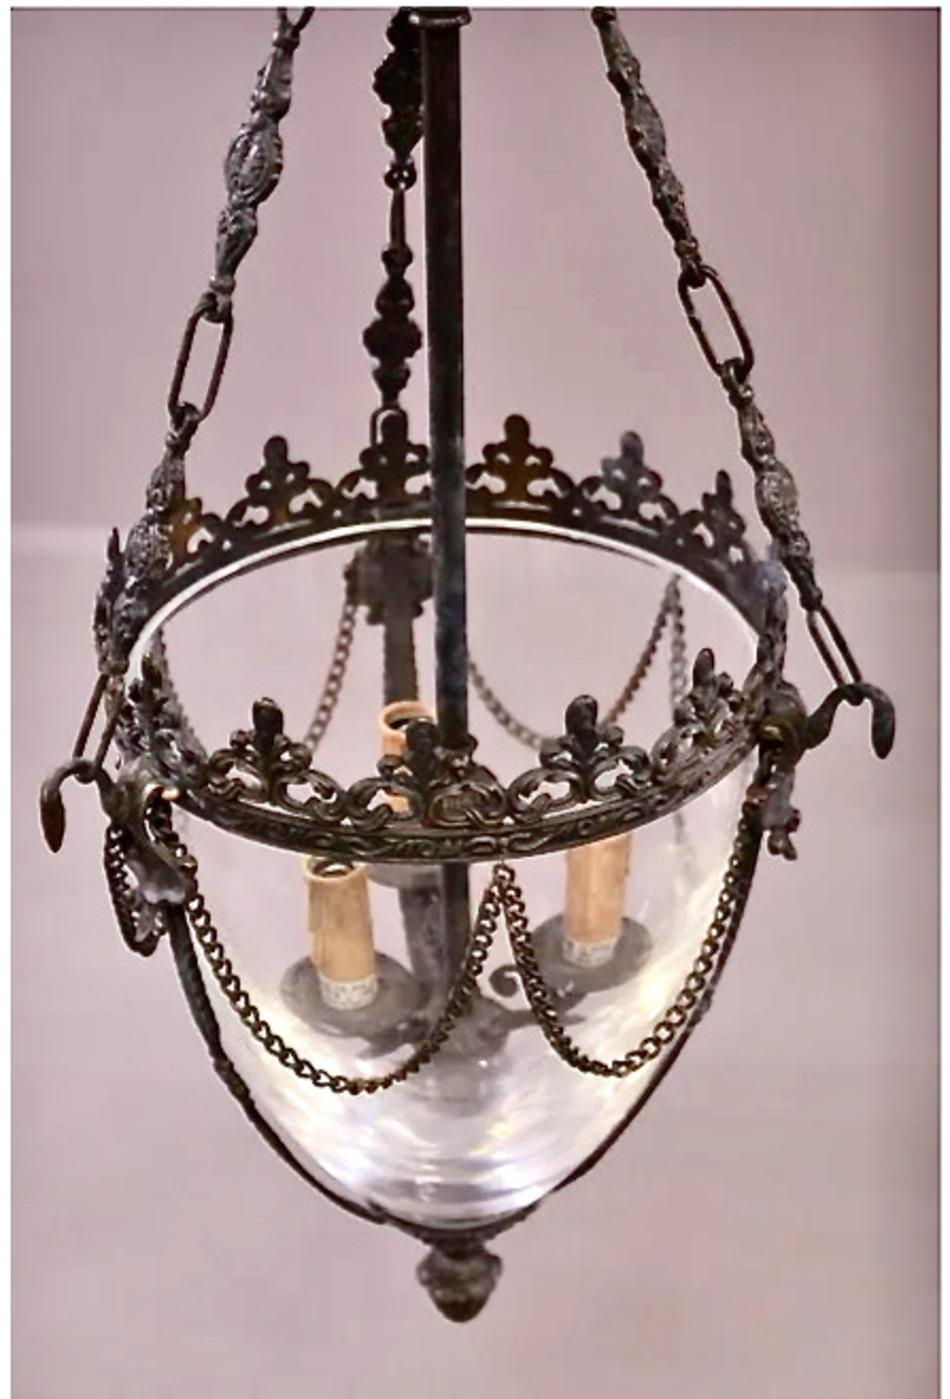 This is a pair of Regency-style bronze bell jar hall lanterns. The lanterns features a crystal bell jar supported by bronze fittings with an applied patina; the side decorative chains are removable. The fixtures were created in Italy in the late